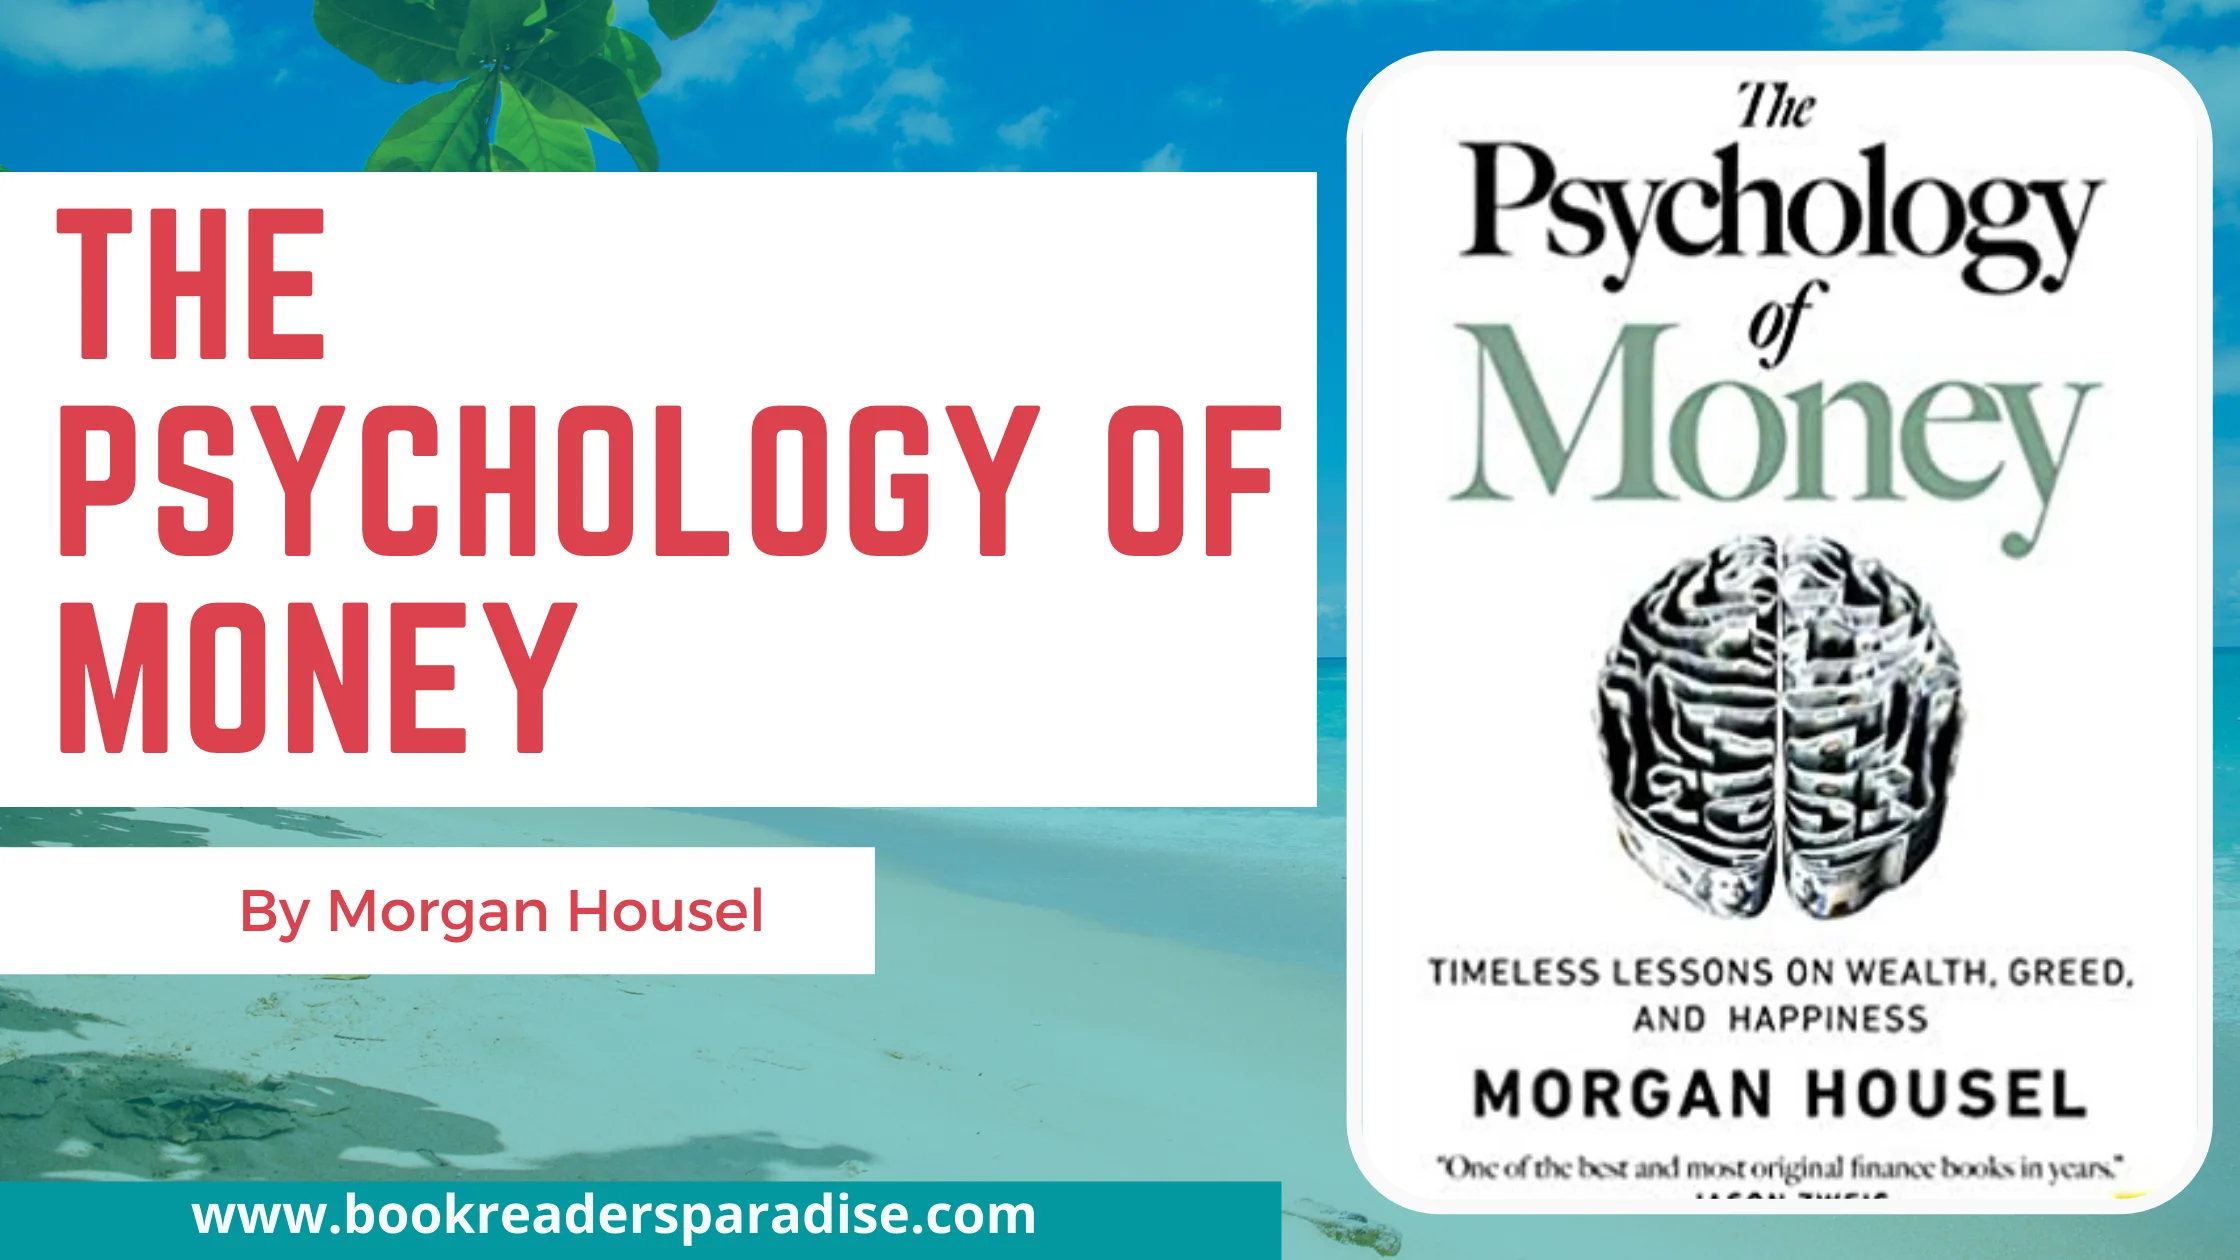 The Psychology of Money PDF FREE Download